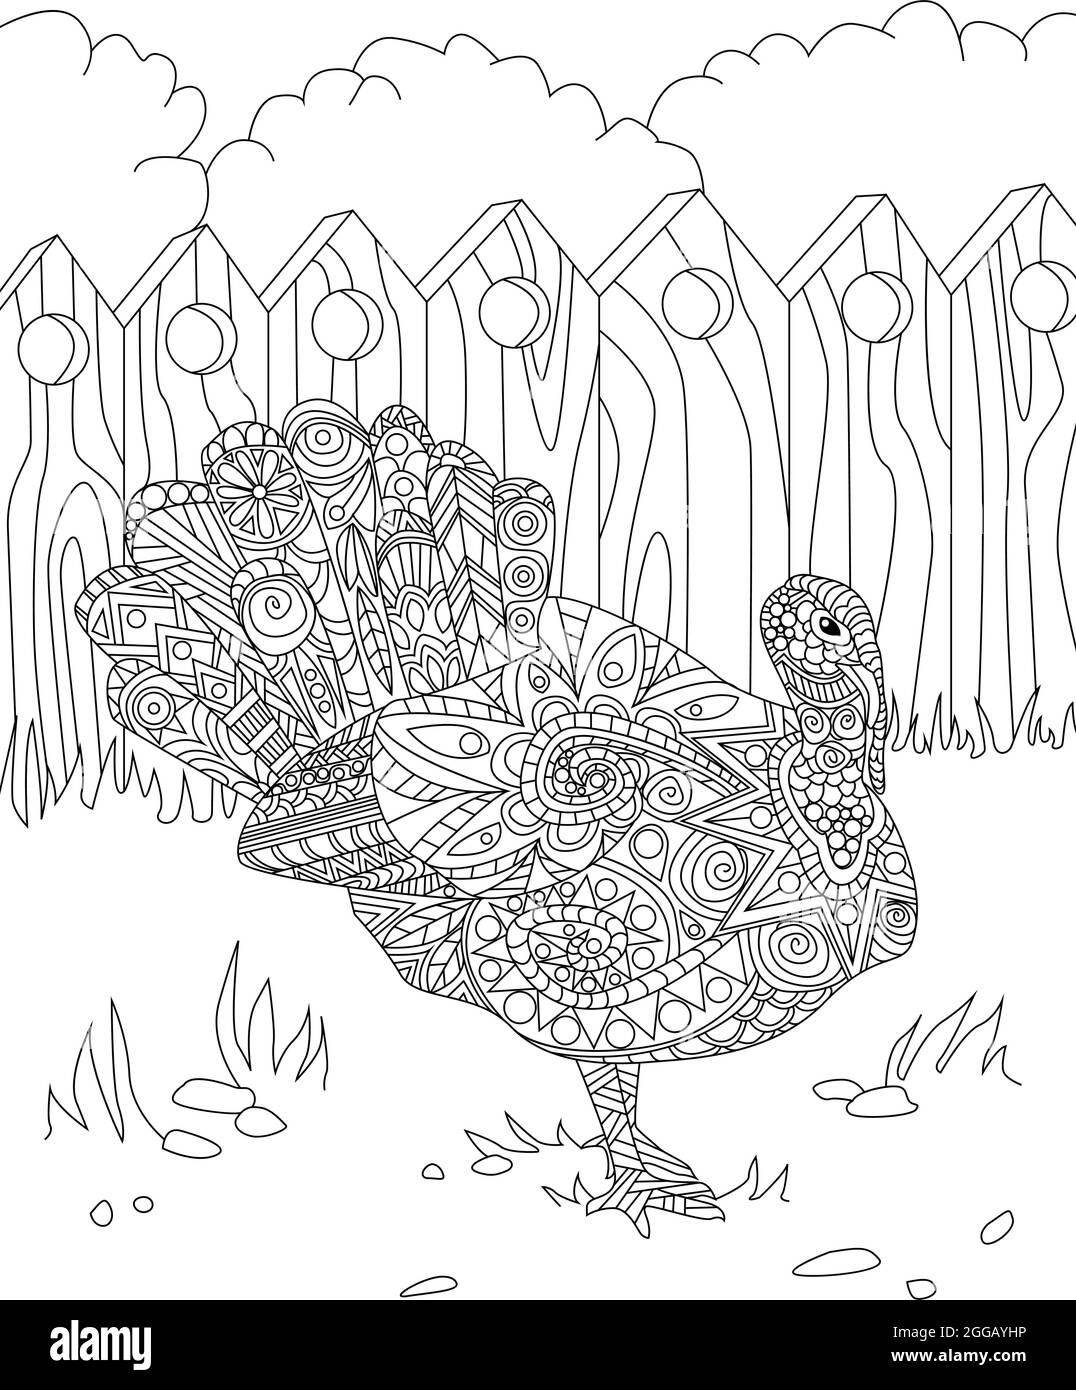 Line Drawing Of A Big Beautiful Peacock Bird With Opened Tail Standing Alone Looking Away Inside Fence. Large Pretty Chicken Specie Drawing Has Stock Vector